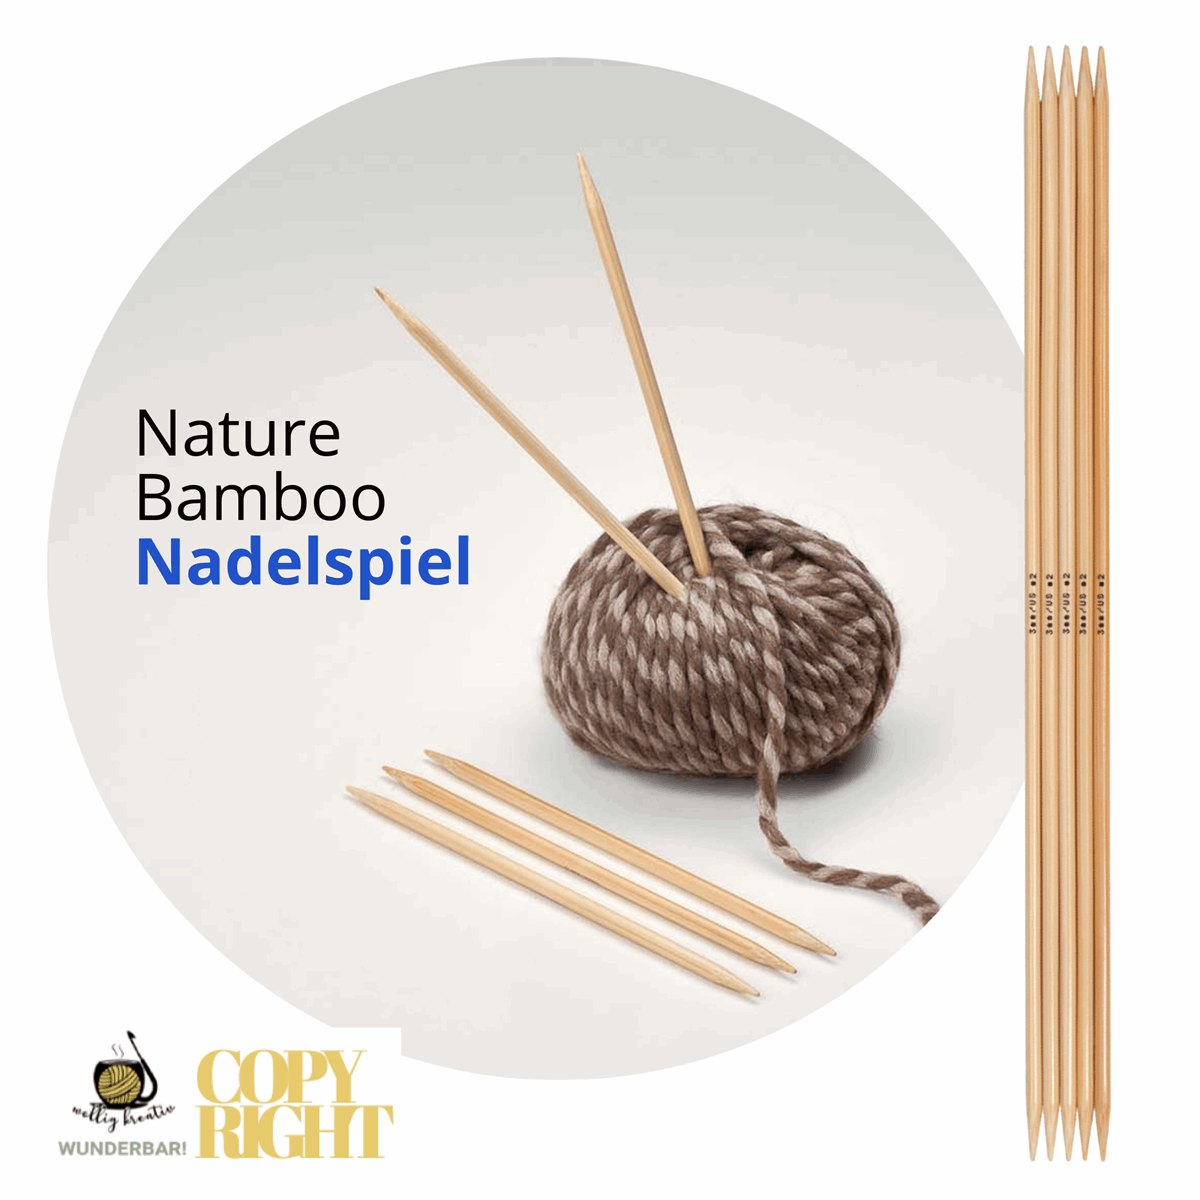 Addi, Nature Bamboo double pointed needles, 65012, size 4 length 20 cm